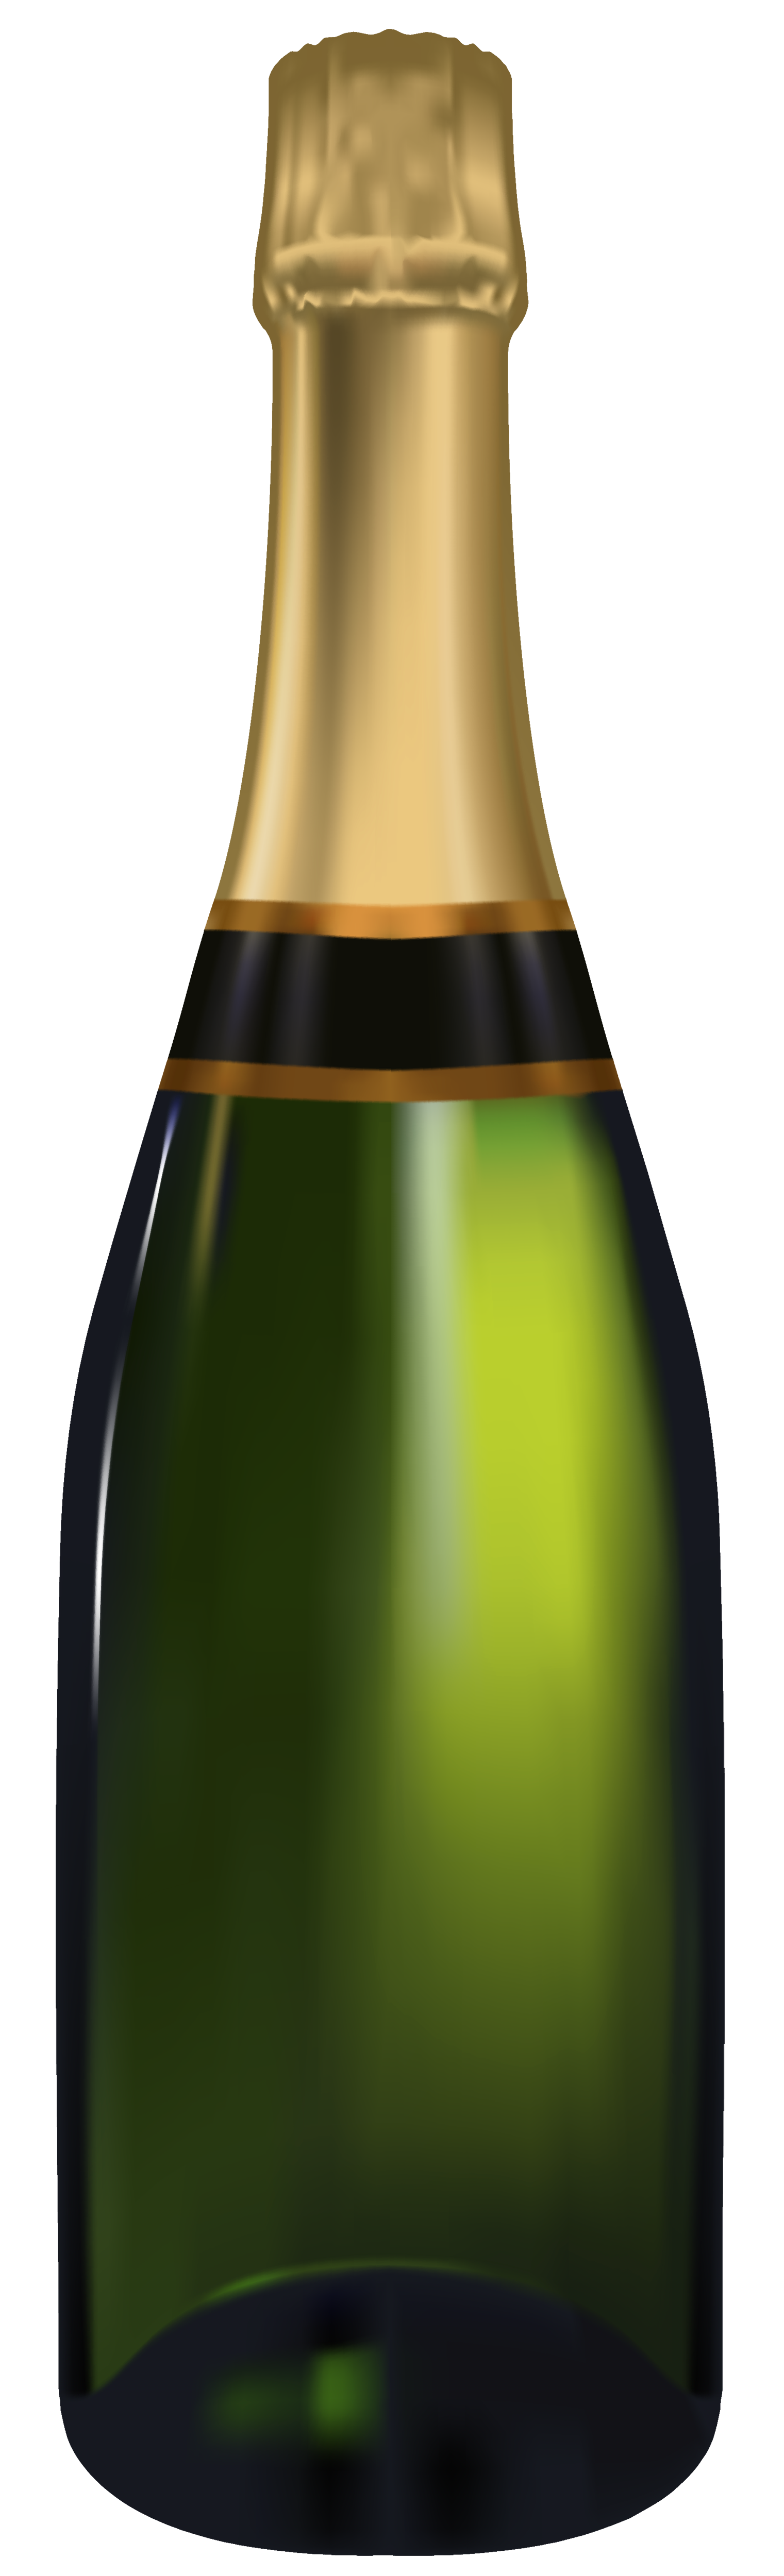 Download Now Hd Quality The Bottle Of Champagne Png Transparent Background Free Download 48926 Freeiconspng